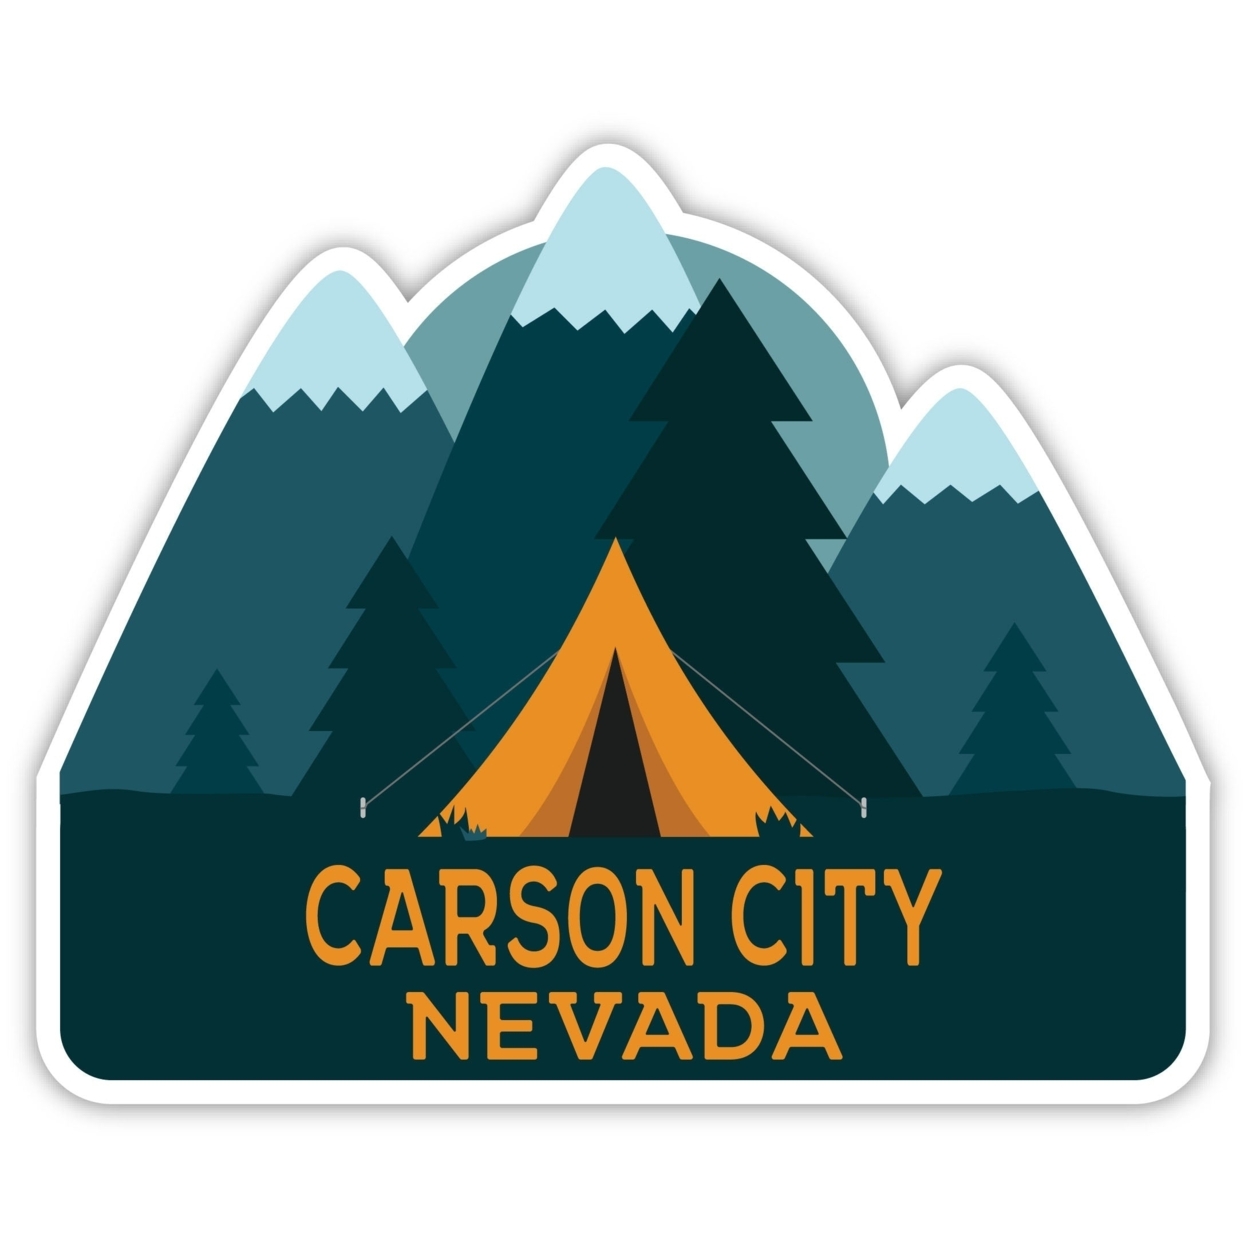 Carson City Nevada Souvenir Decorative Stickers (Choose Theme And Size) - 4-Pack, 10-Inch, Tent